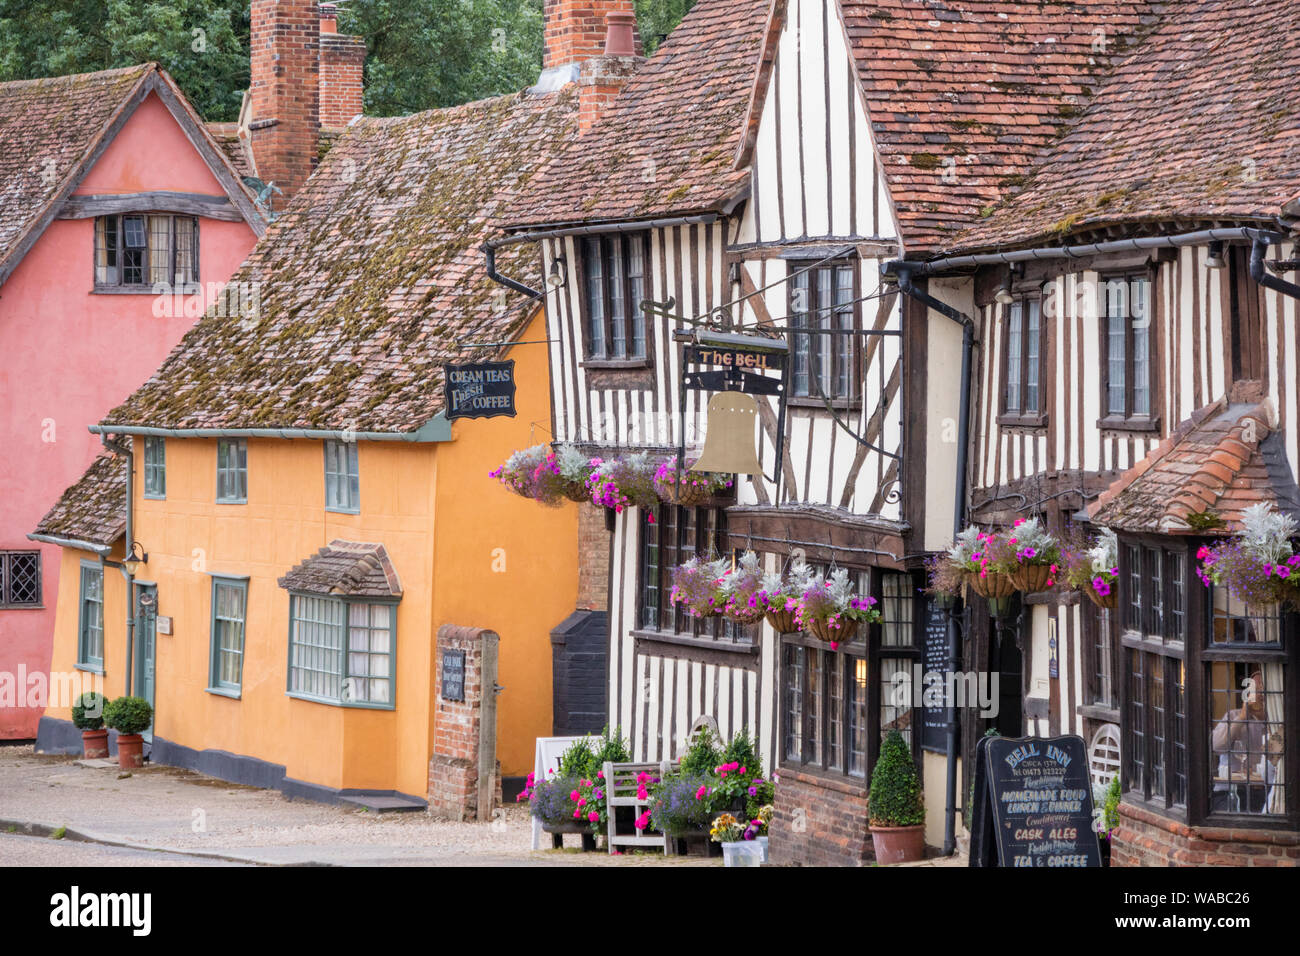 The picturesque timber-framed village of Kersey, Suffolk, England, UK Stock Photo